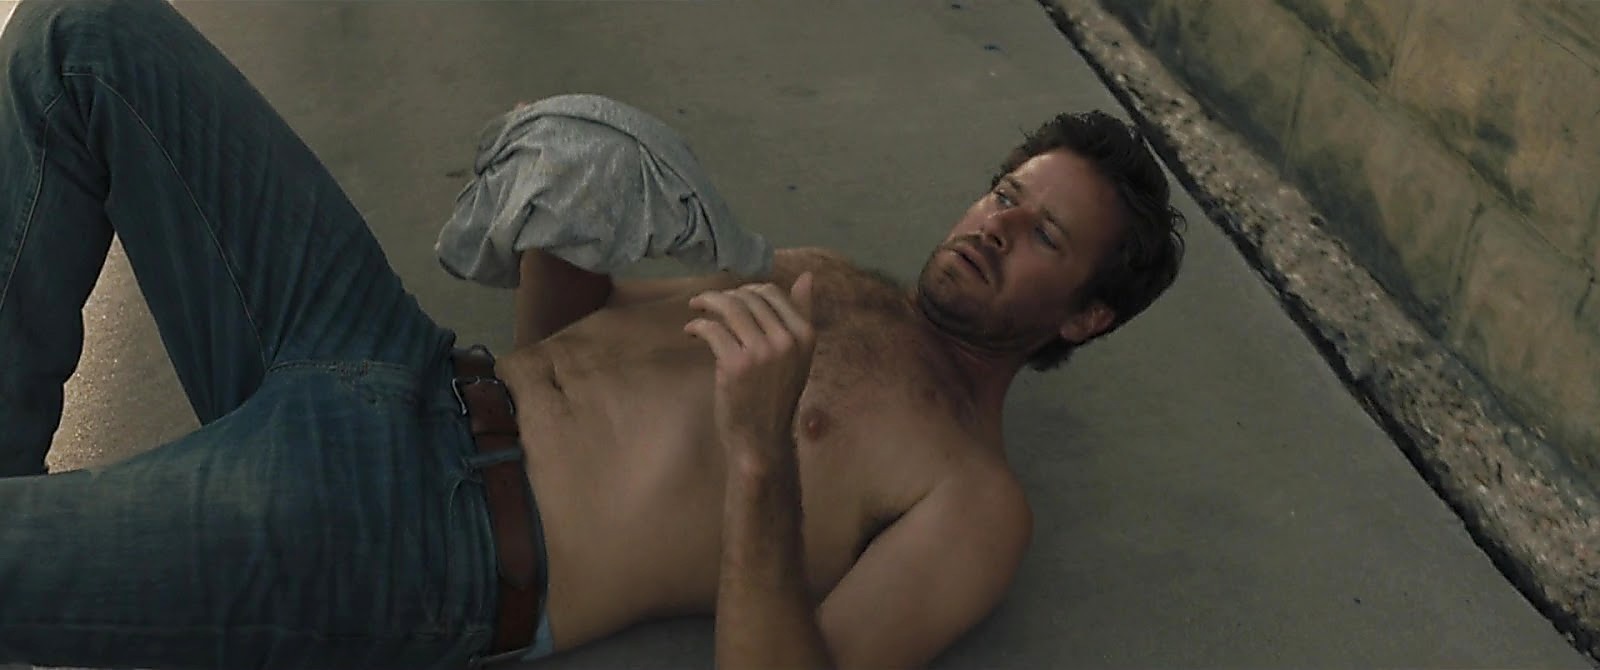 Armie Hammer sexy shirtless scene October 18, 2019, 4pm